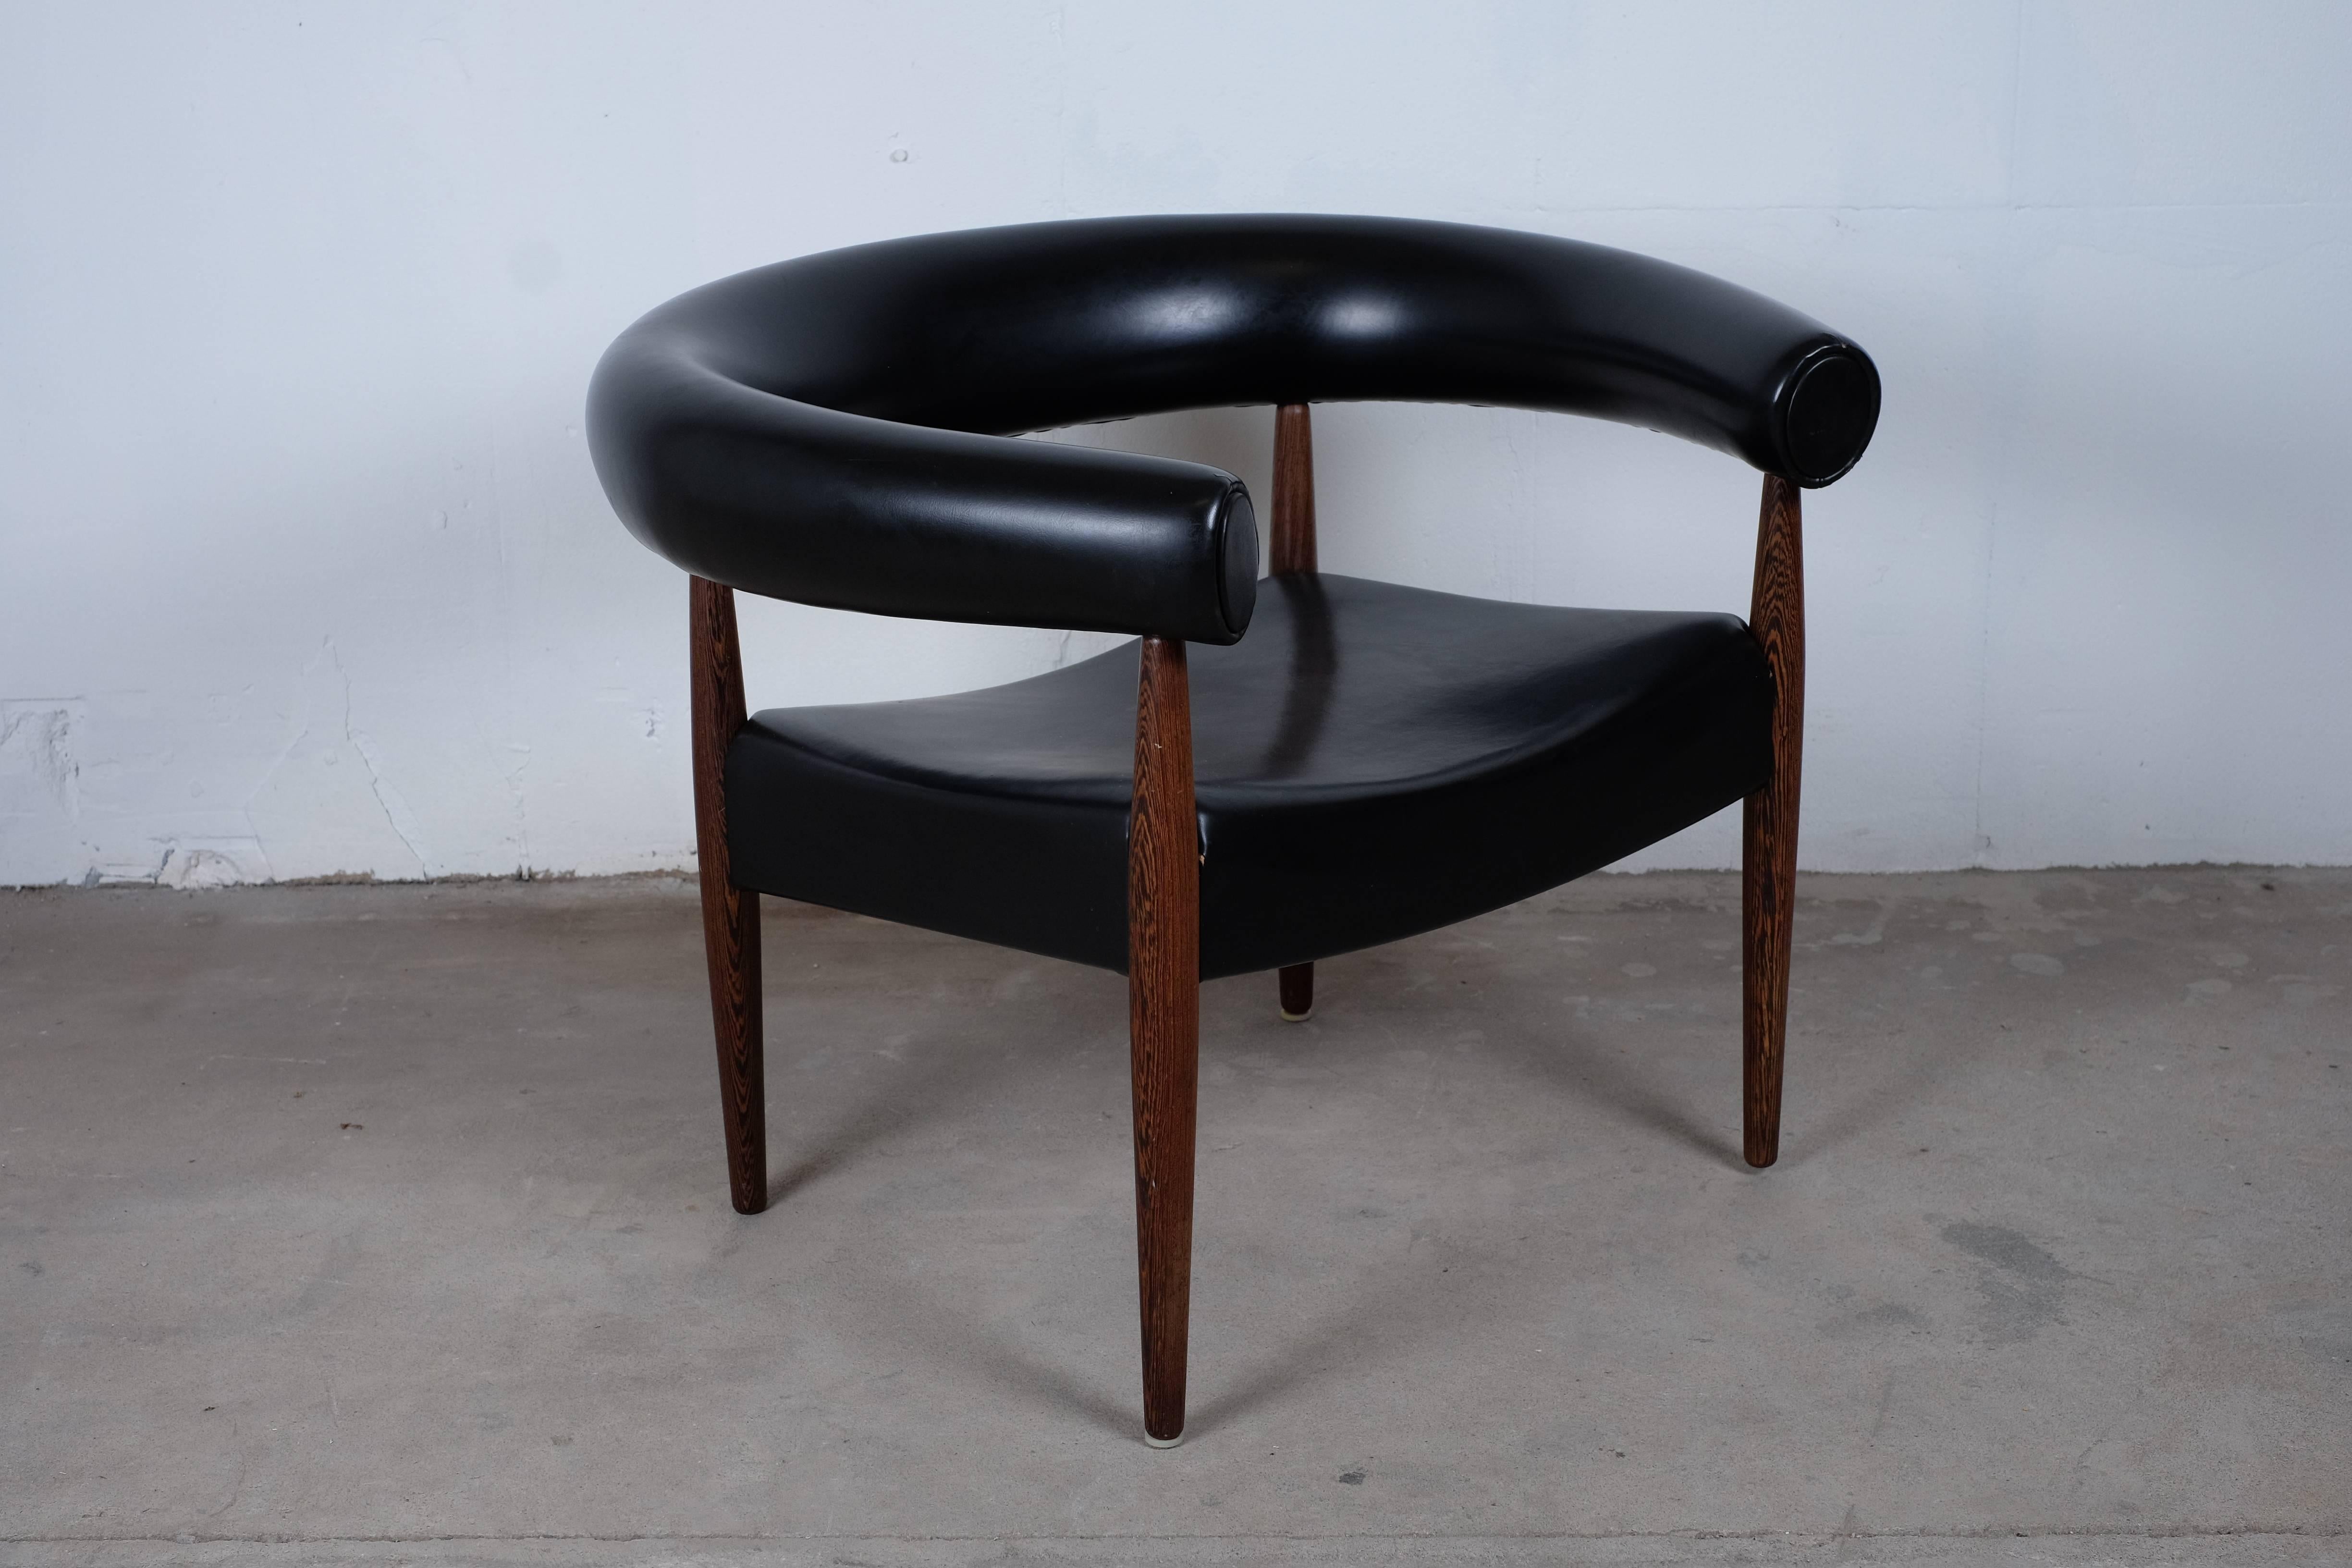 This iconic and beautiful chair was designed in 1958 by the most prolific female furniture designer Denmark has ever produced, Nanna Ditzel. Produced by Kold Savværk.
The chair is now in re-production but this chair is the original one with black